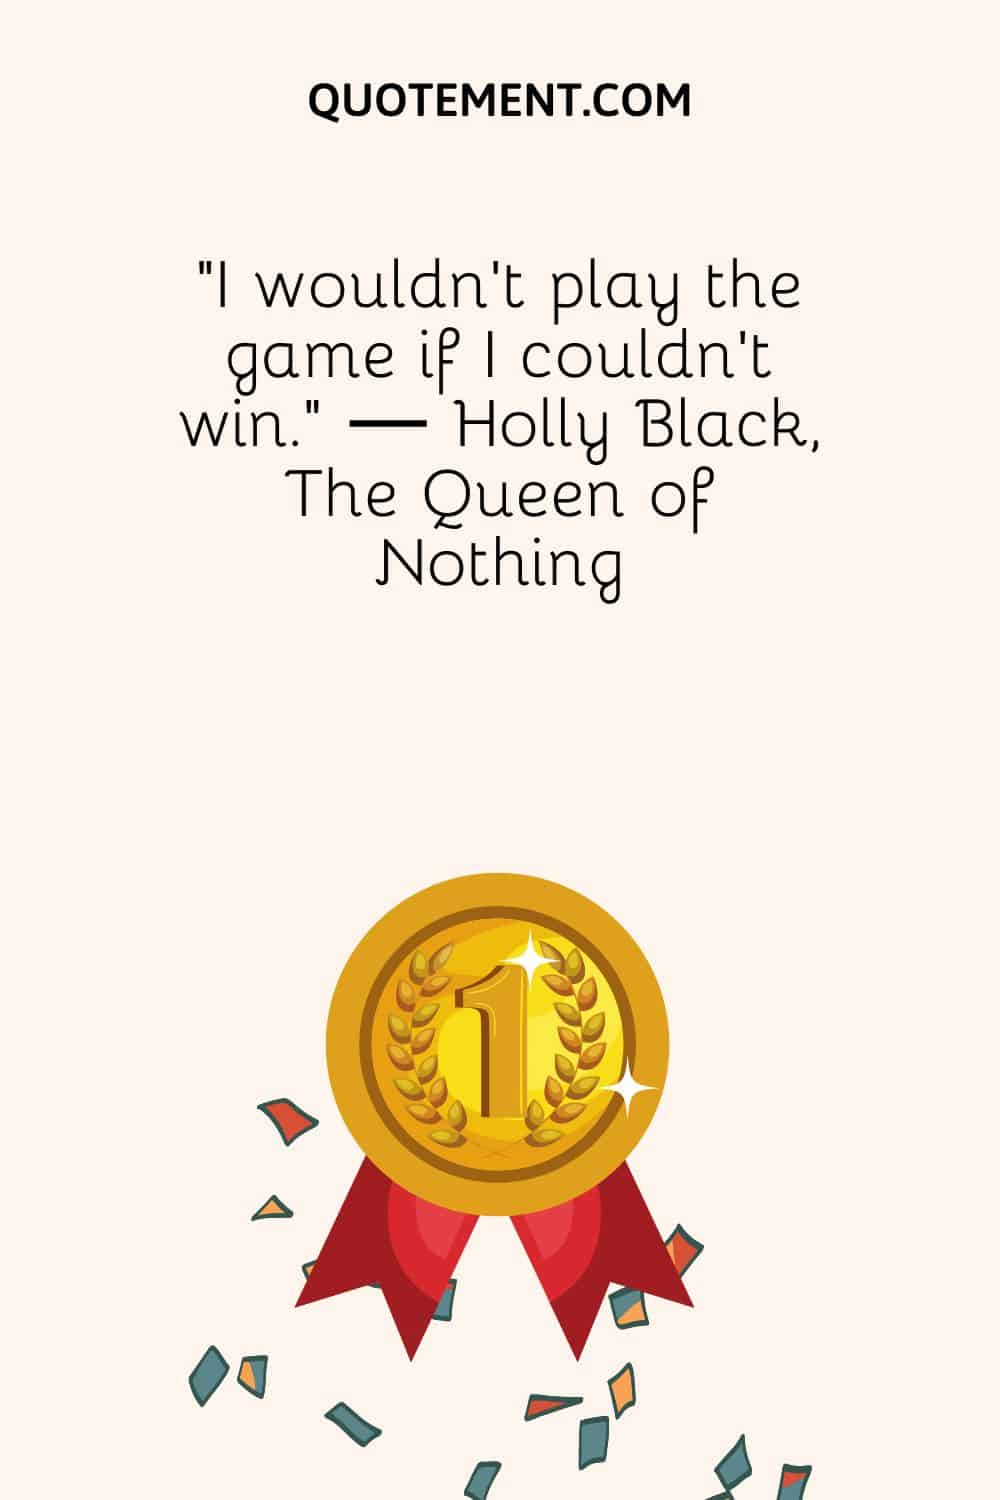 “I wouldn't play the game if I couldn't win.” ― Holly Black, The Queen of Nothing